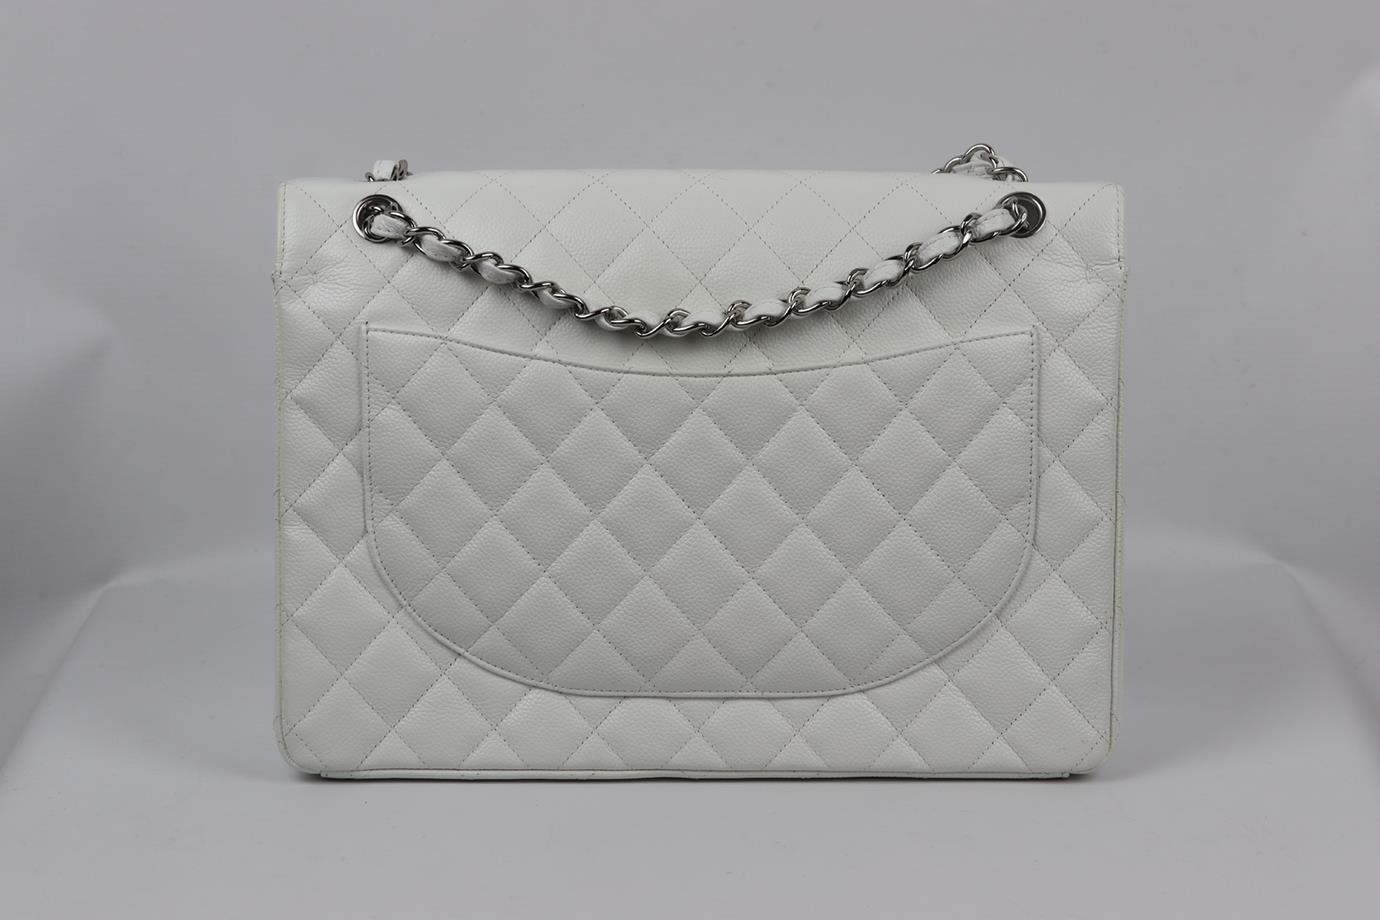 Chanel 2011 Maxi Classic Quilted Caviar Leather Double Flap Shoulder Bag In Excellent Condition For Sale In London, GB